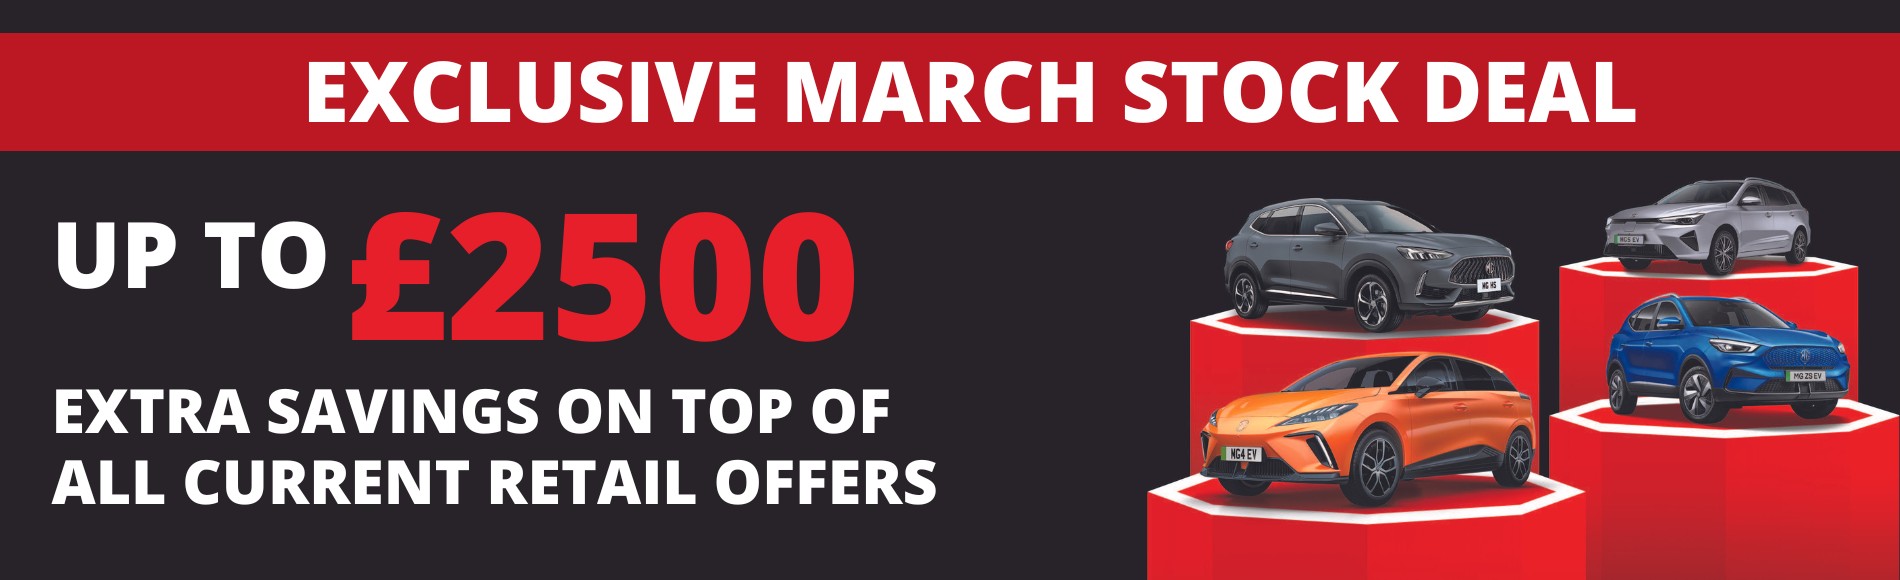 Exclusive March Stock Deal